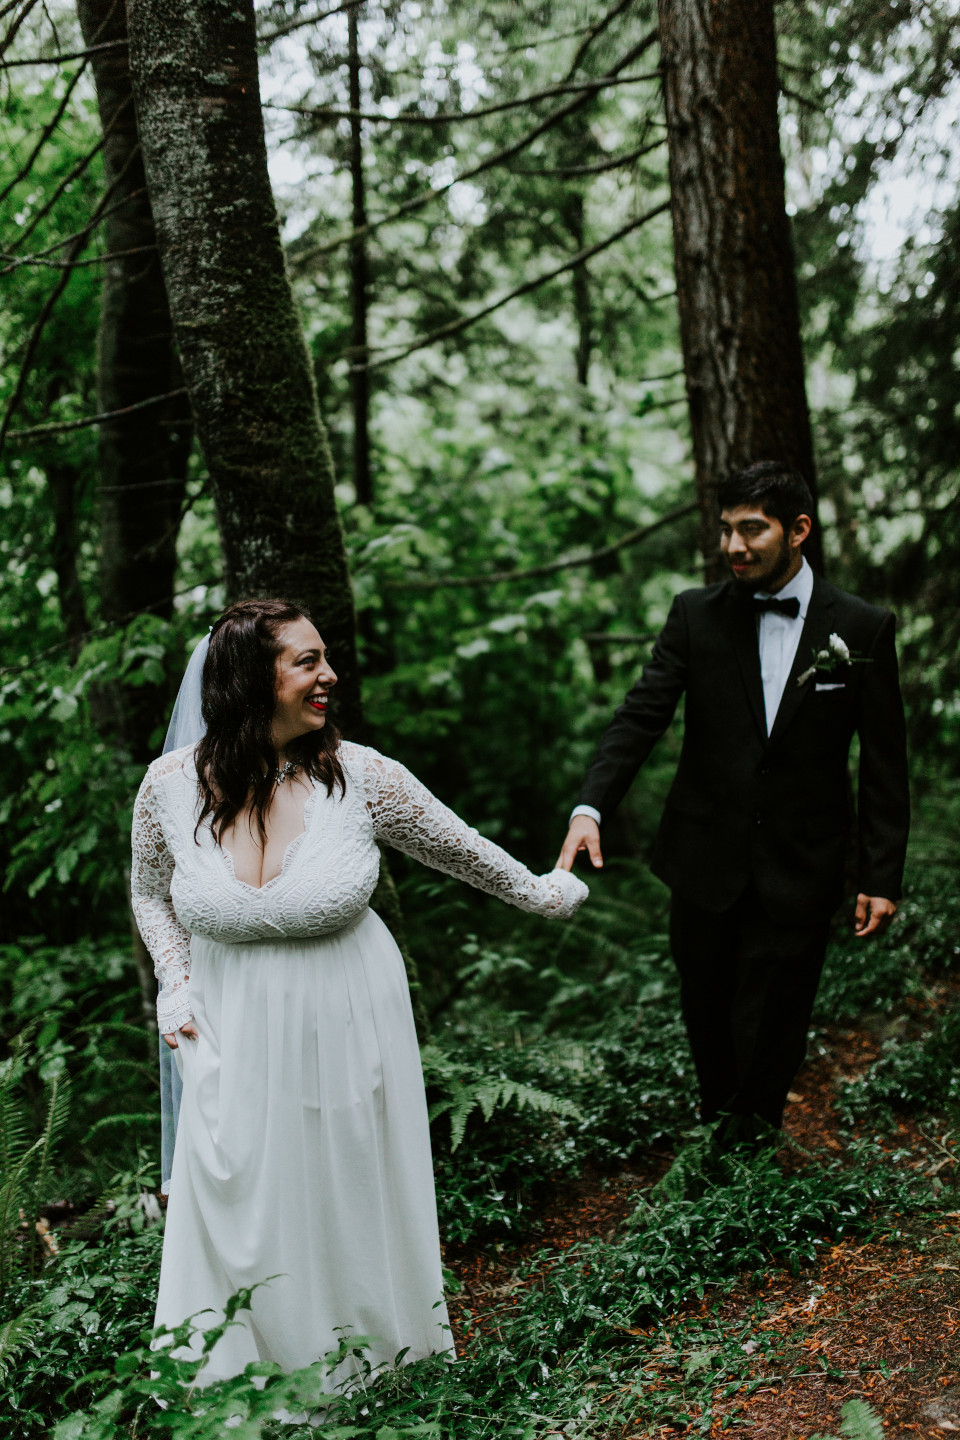 Sarah and Sam hold hands at Skamania House, Washington. Elopement photography in Portland Oregon by Sienna Plus Josh.